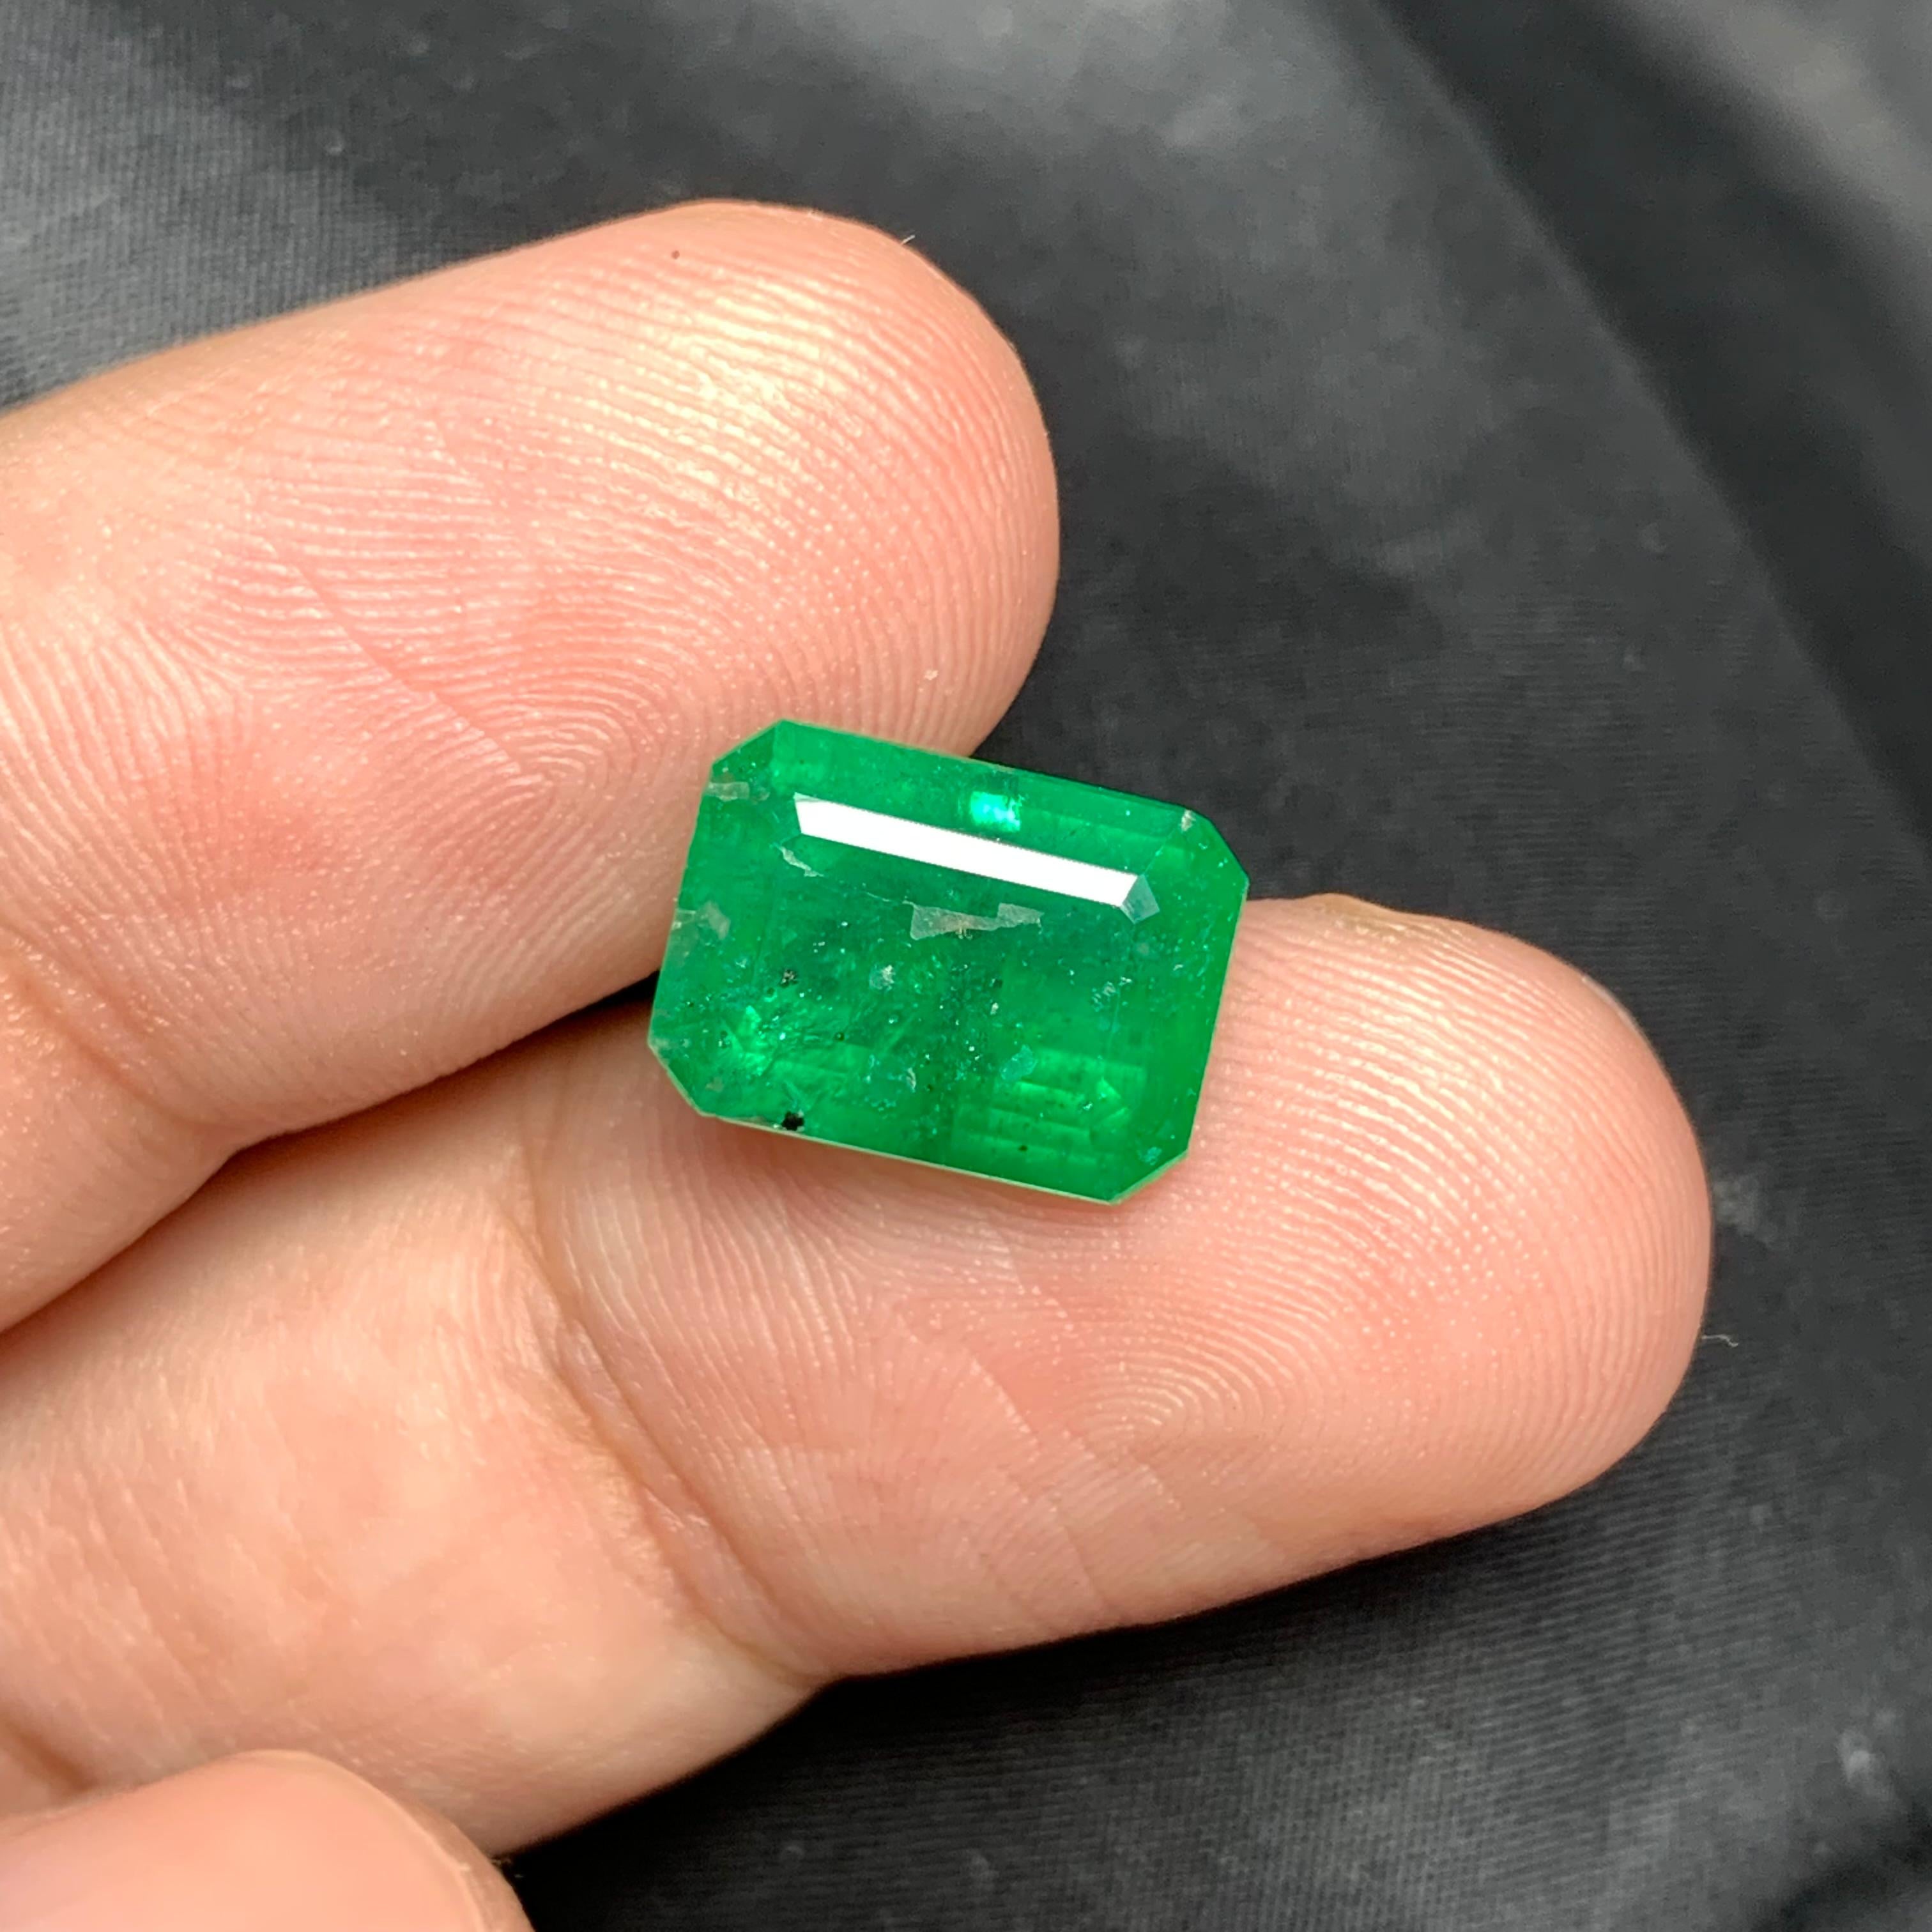 Loose Emerald
Weight: 3.95 Carats
Dimensions: 11.7 x 8.1 x 5 Mm
Origin: Swat Pakistan
Shape: Emerald
Color: Green
Treatment: Non
Certificate: On Demand

The Swat Emerald, also known as the Mingora Emerald, is a rare and highly prized gemstone